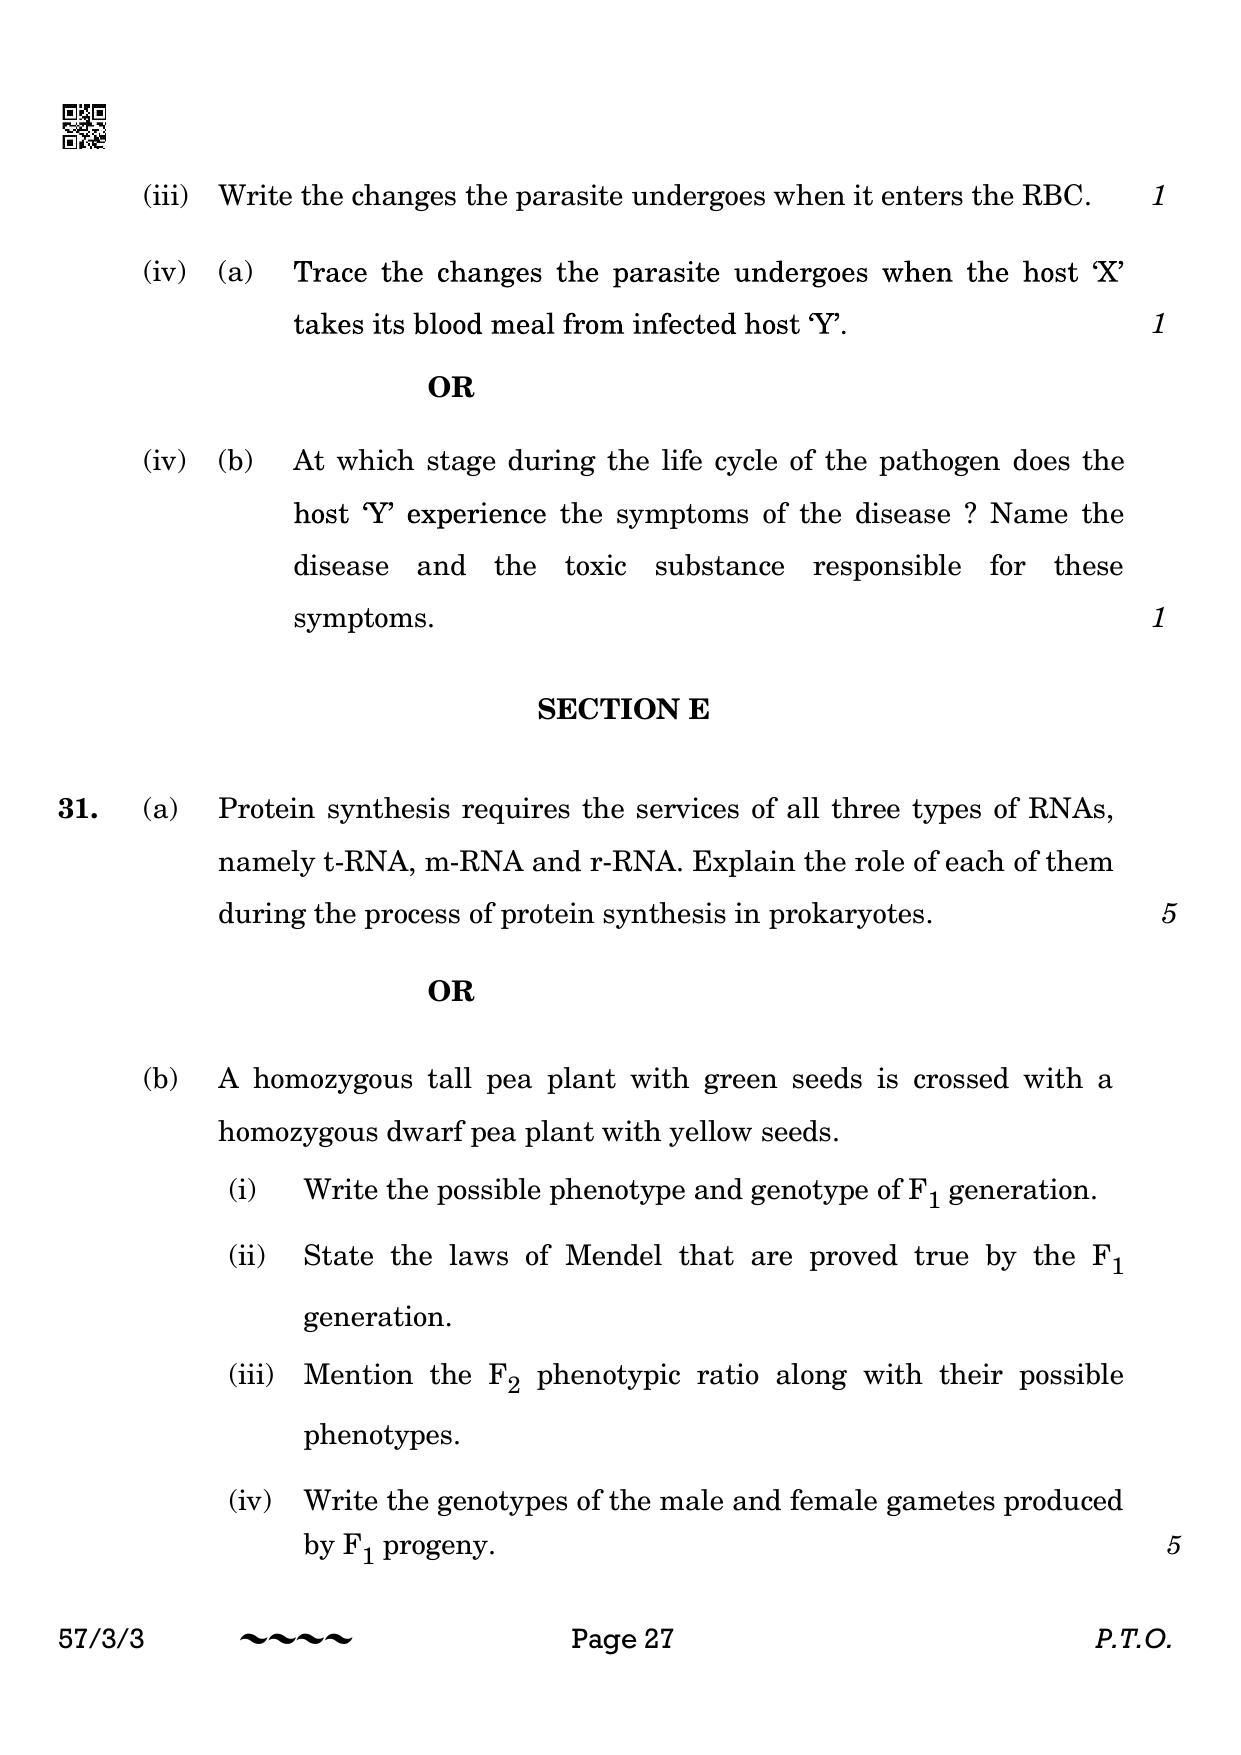 CBSE Class 12 57-3-3 Biology 2023 Question Paper - Page 27